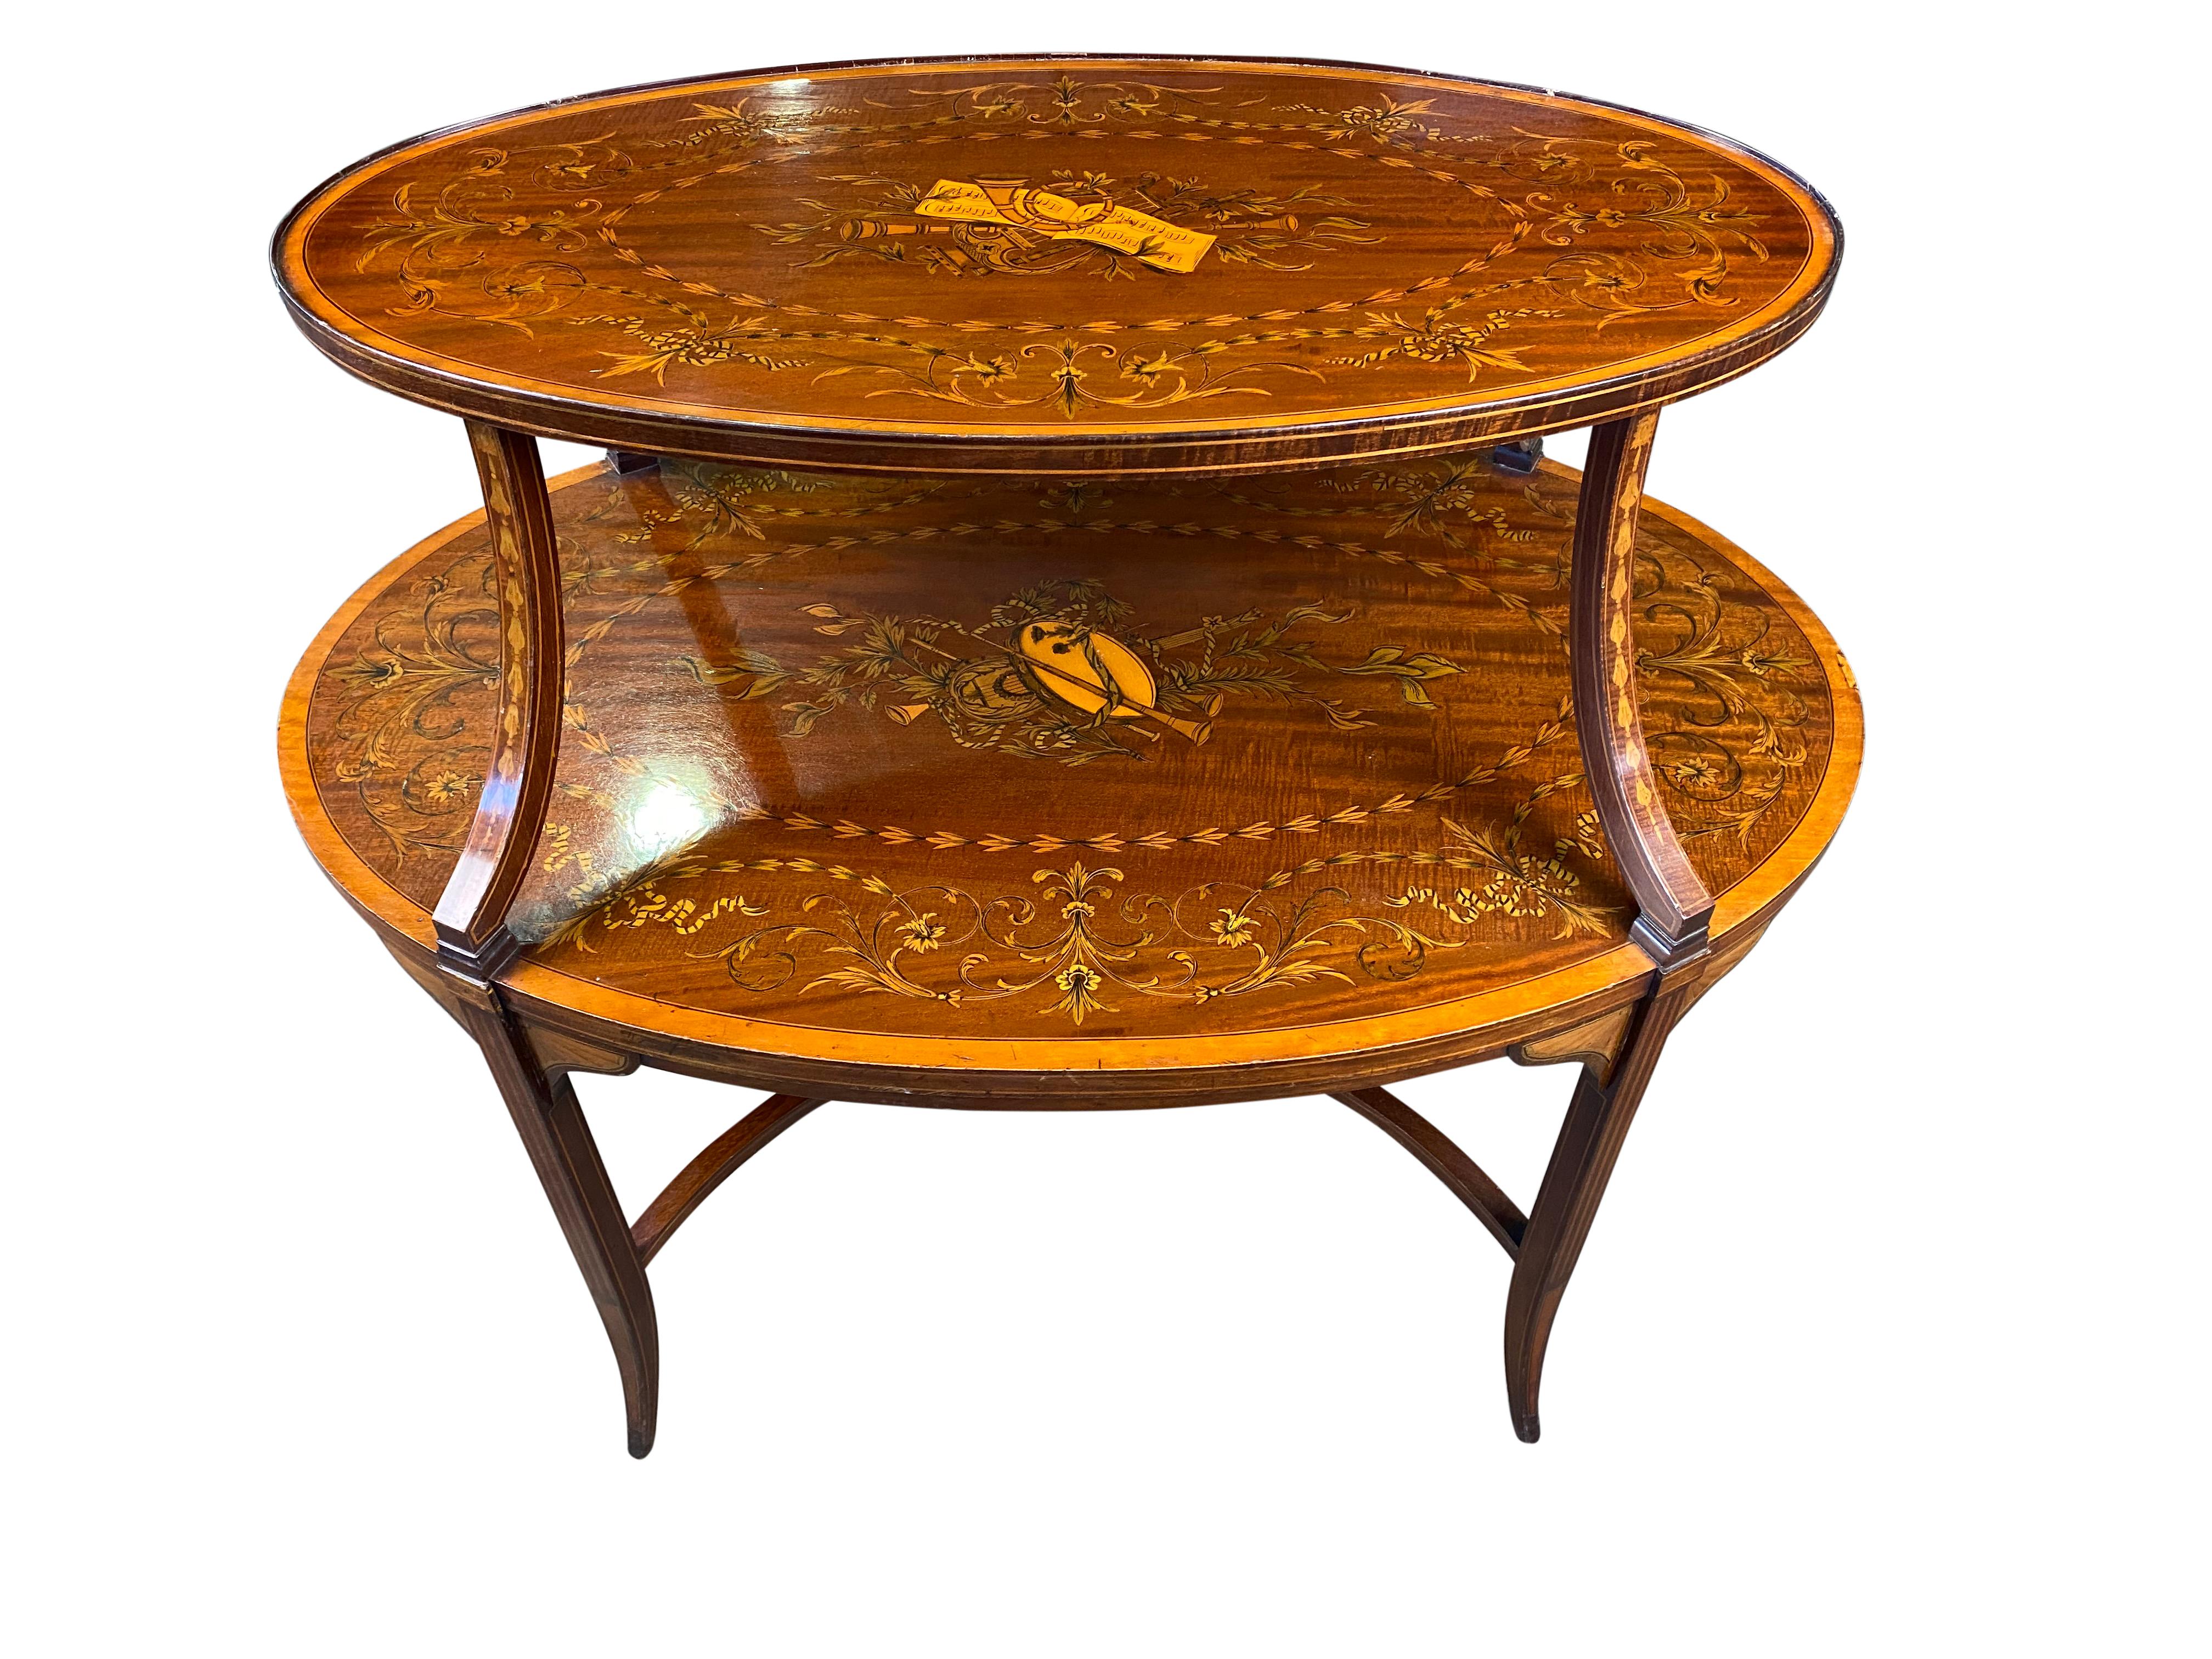 The work and detail to this English étagère is exceptional, not just to the table itself, but the elegant flora pattern inlay the top surfaces. The scenes depict musical instruments. An absolutely stunning craftsmanship. 

Dimensions (cm)
80 H,